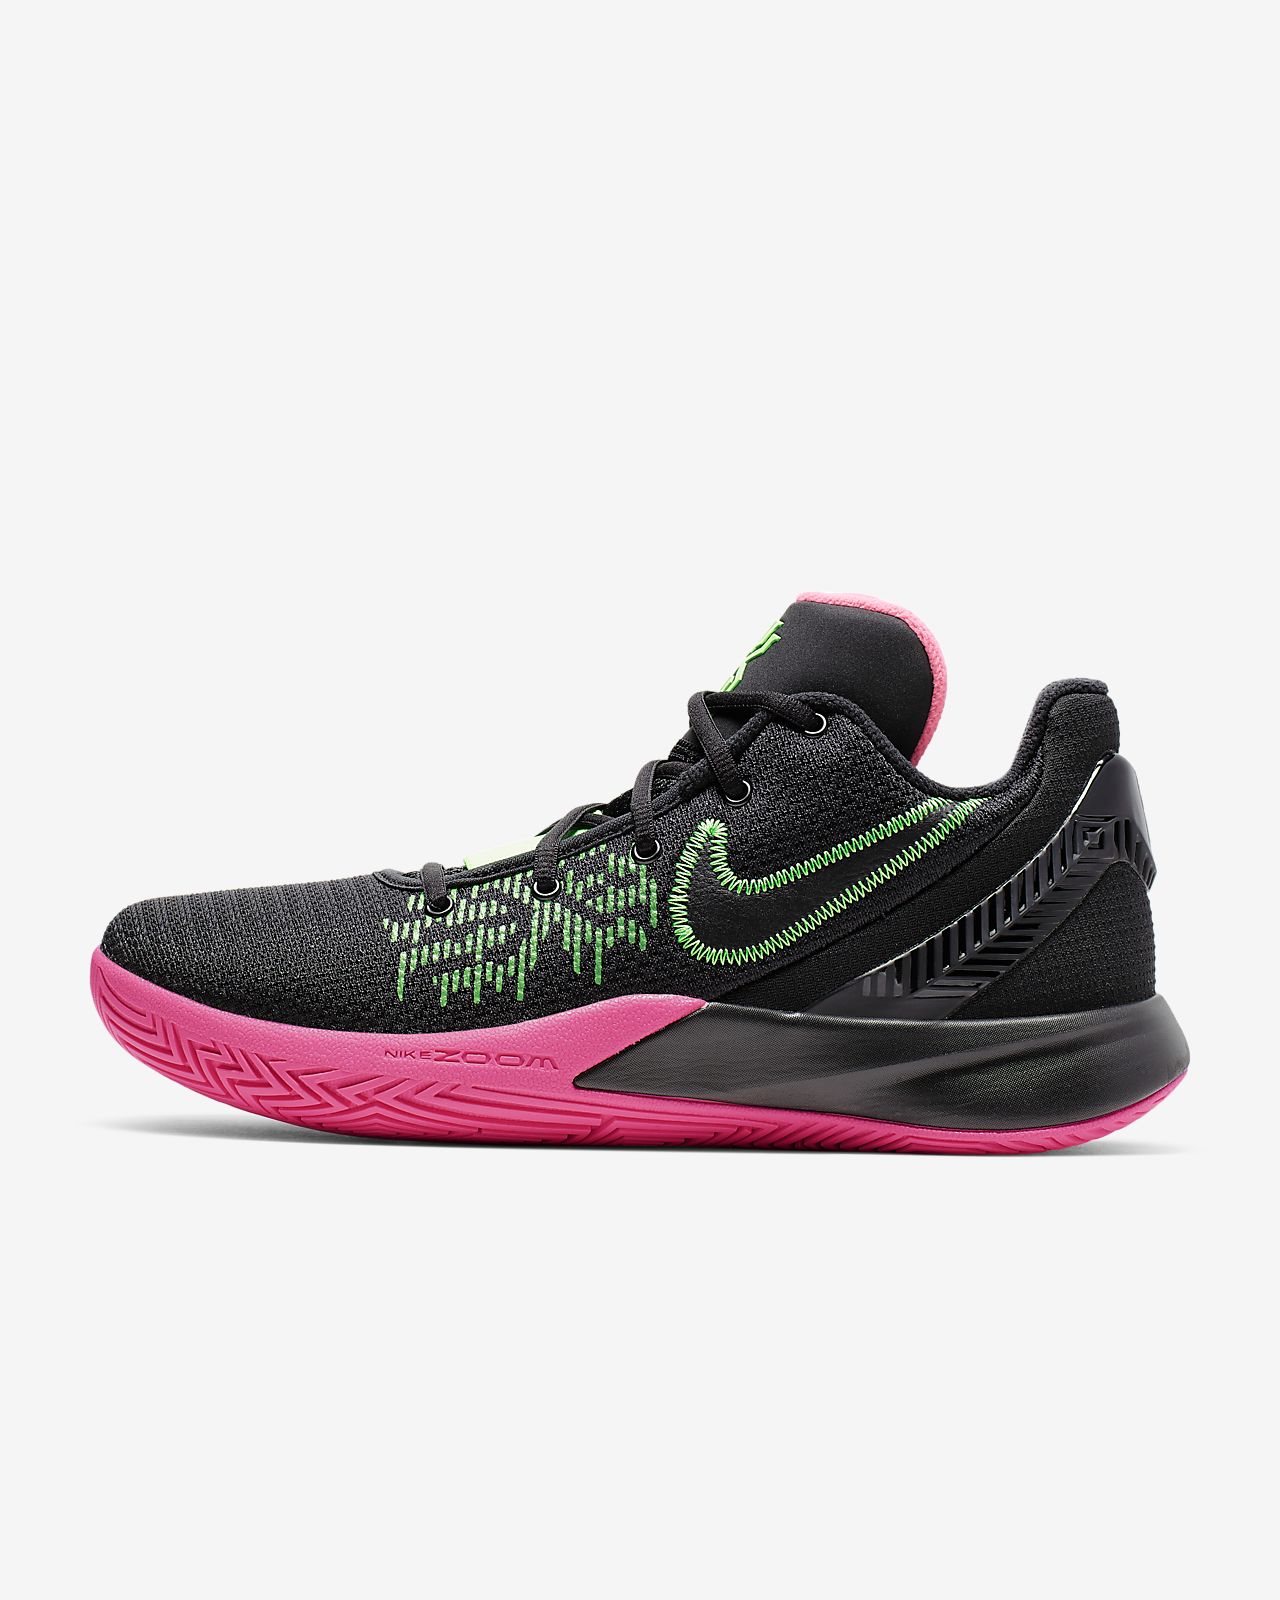 kyrie irving shoes black and pink